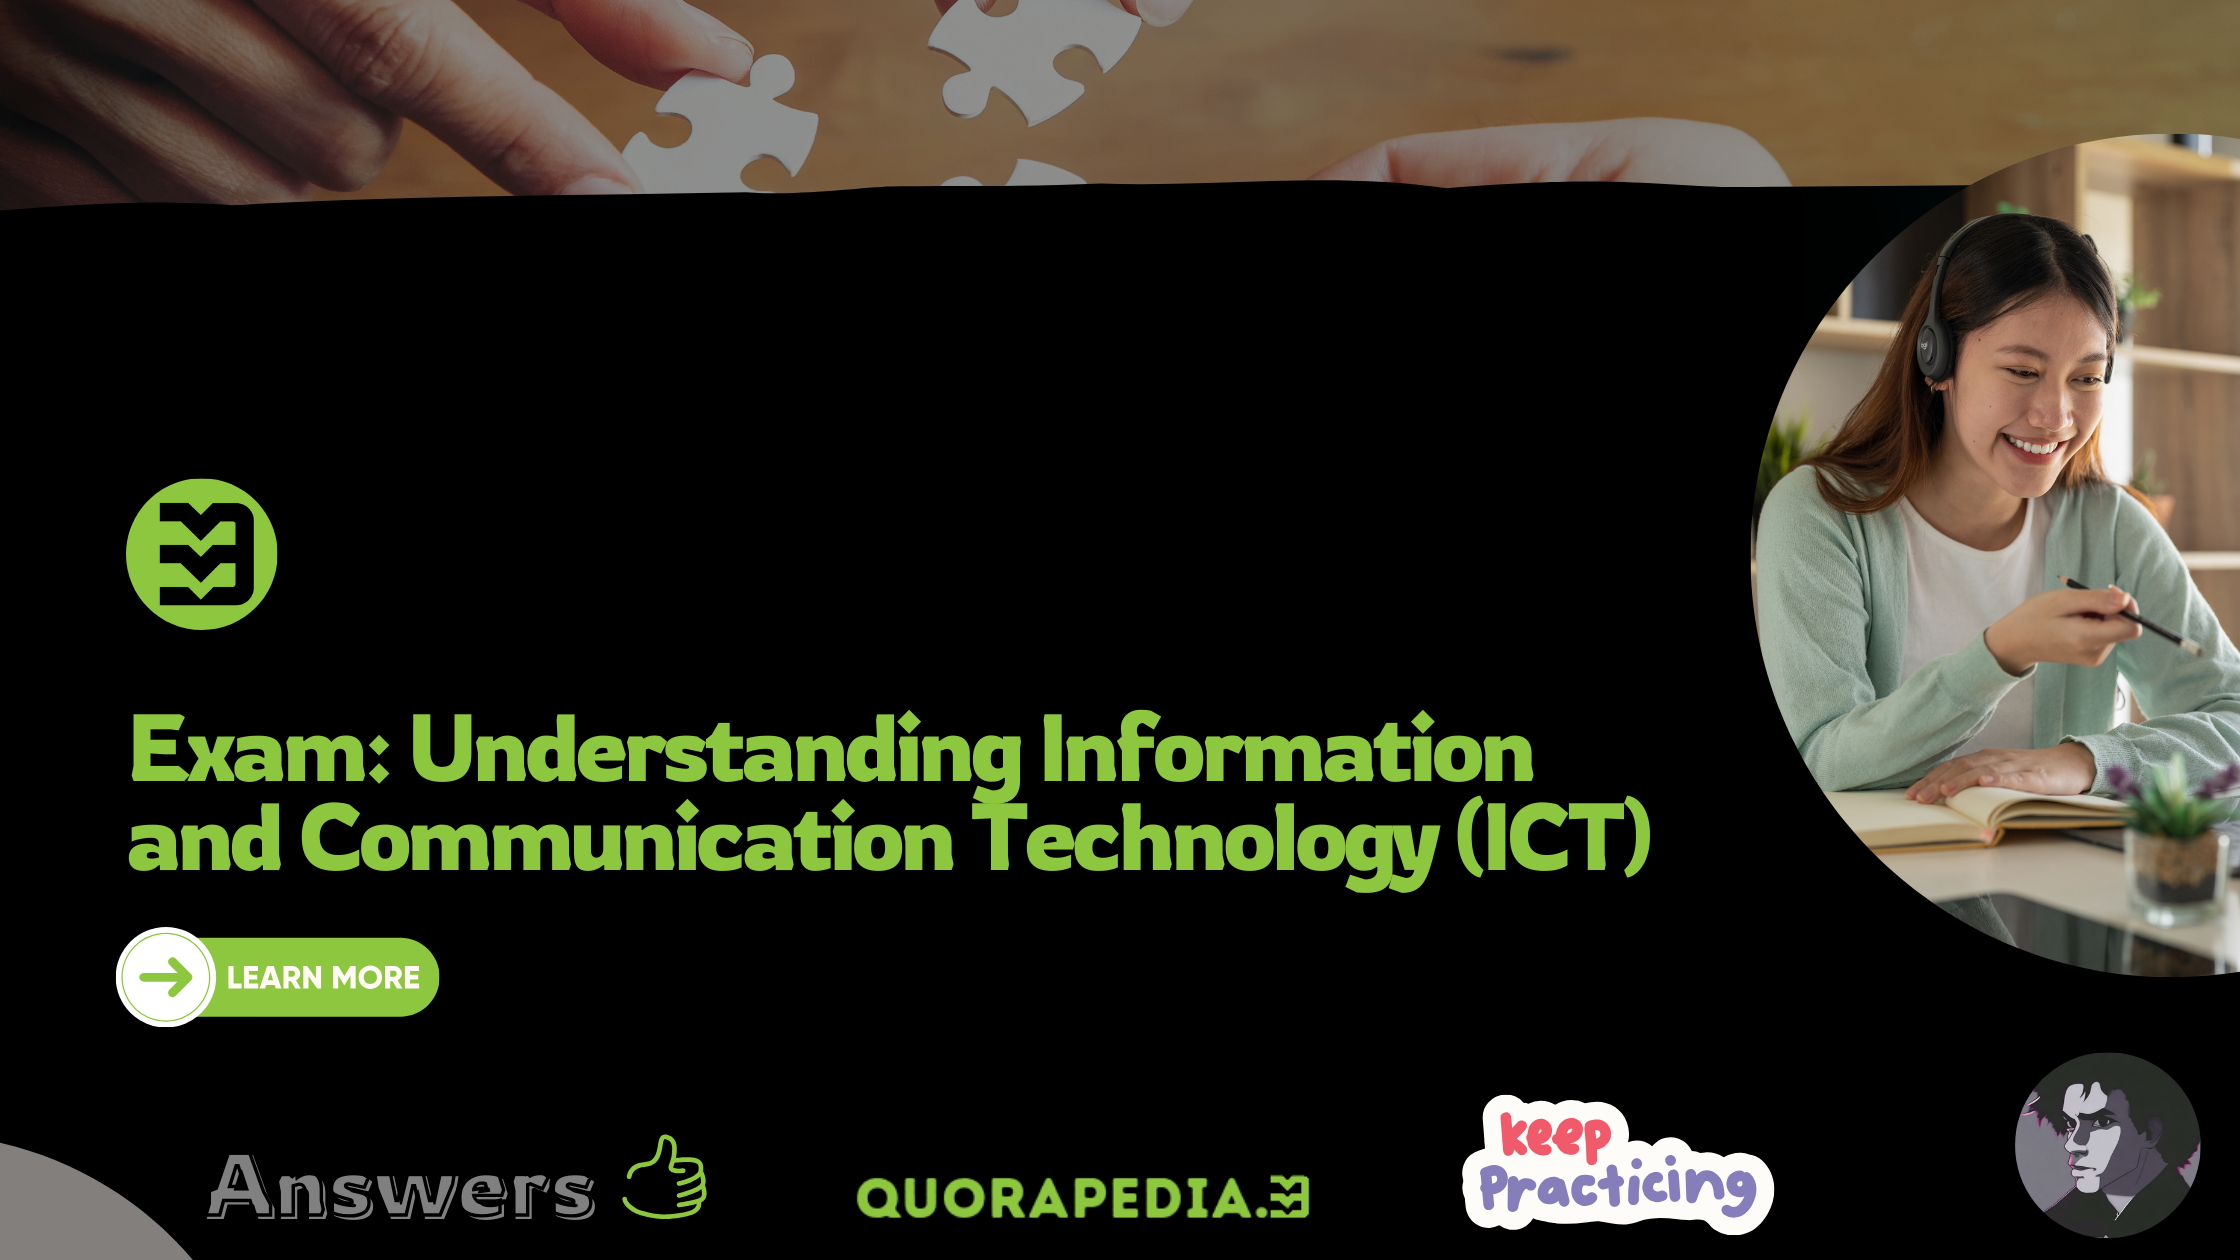 Exam: Advanced Concepts in Information and Communication Technology (ICT)